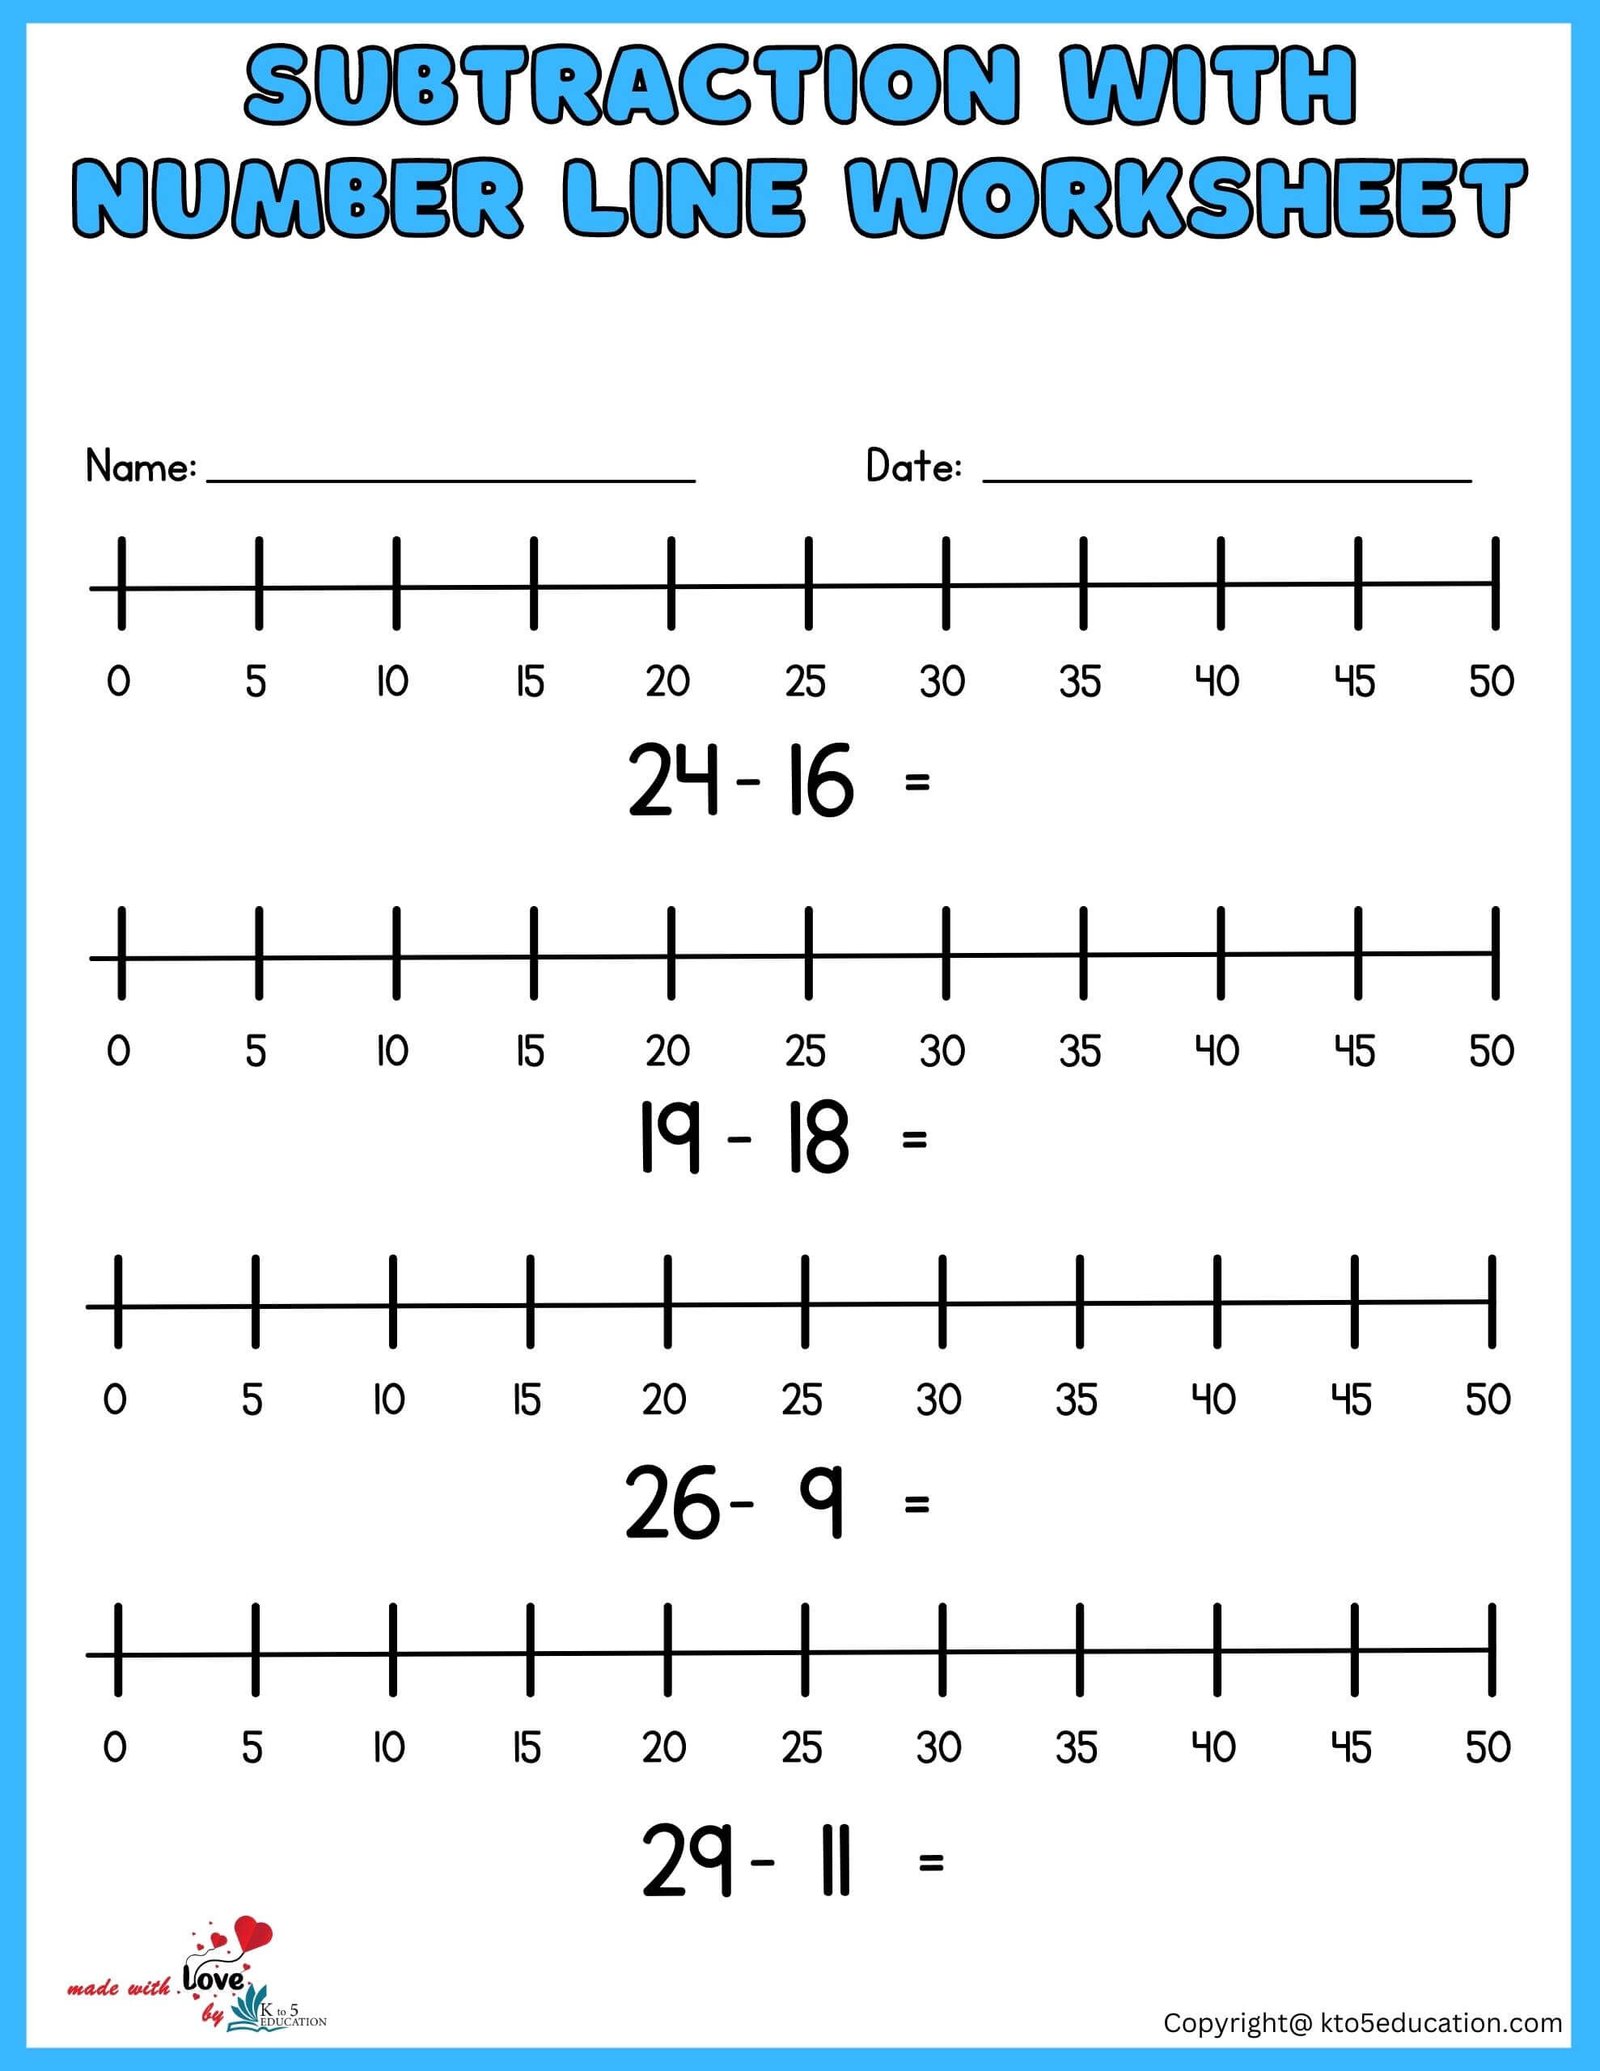 Free Subtraction With Number Line Worksheet 1-50 For Online Practice